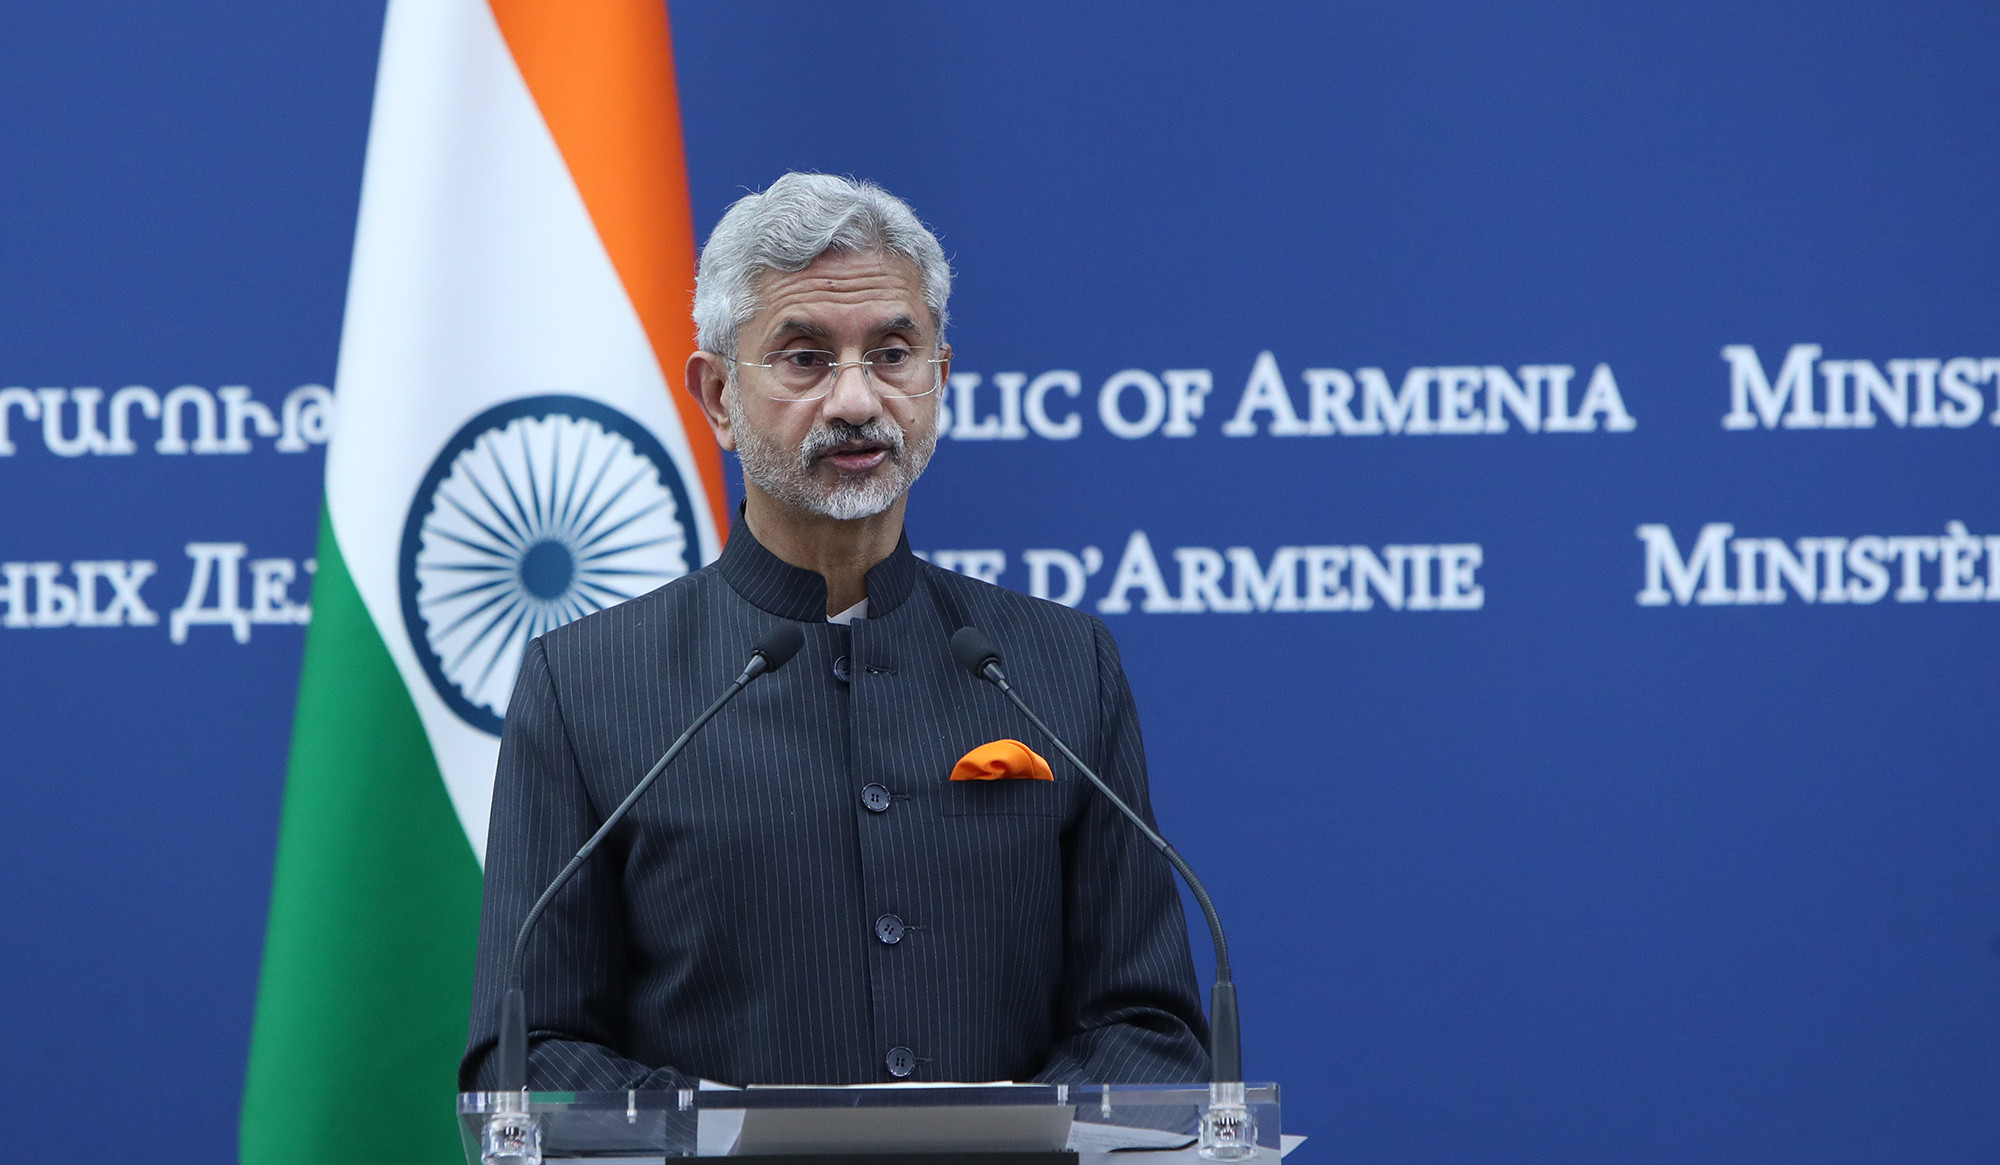 We are in favor of peaceful settlement of Nagorno-Karabakh conflict through diplomacy: Minister of Foreign Affairs of India